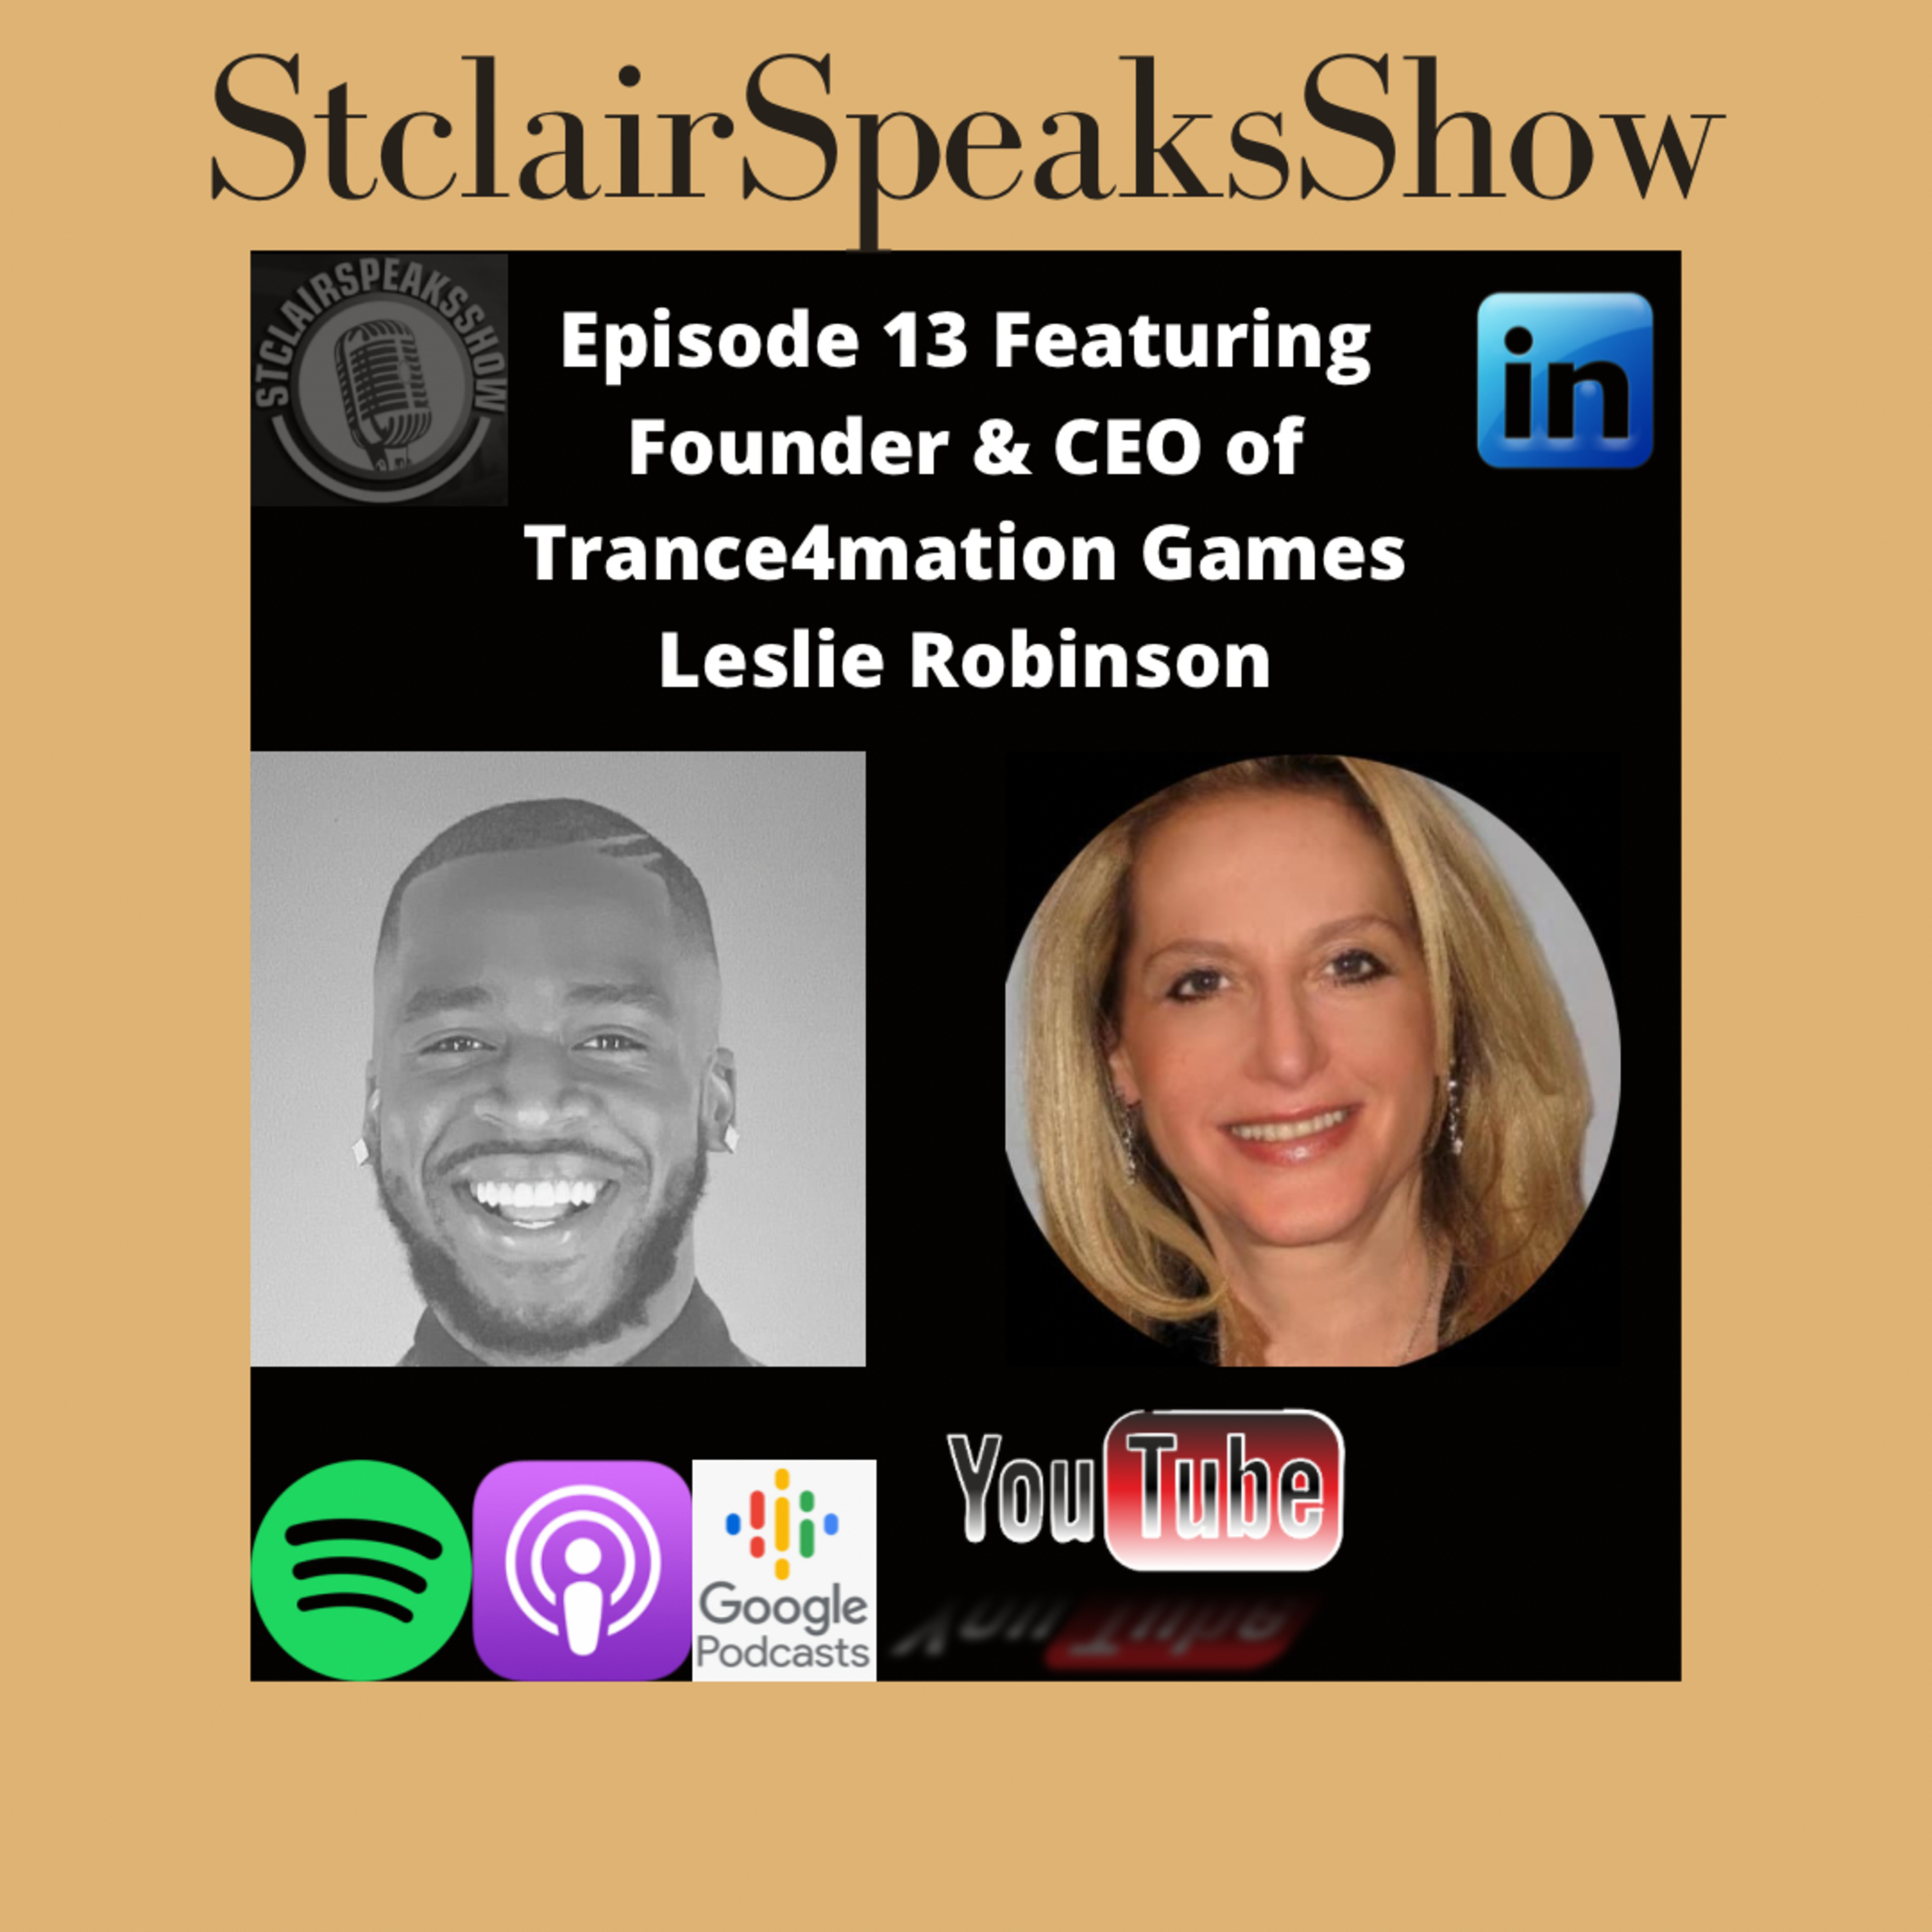 The StclairSpeaksShow Podcast Featuring Leslie Robinson Founder & CEO at Trance4mation Games Image